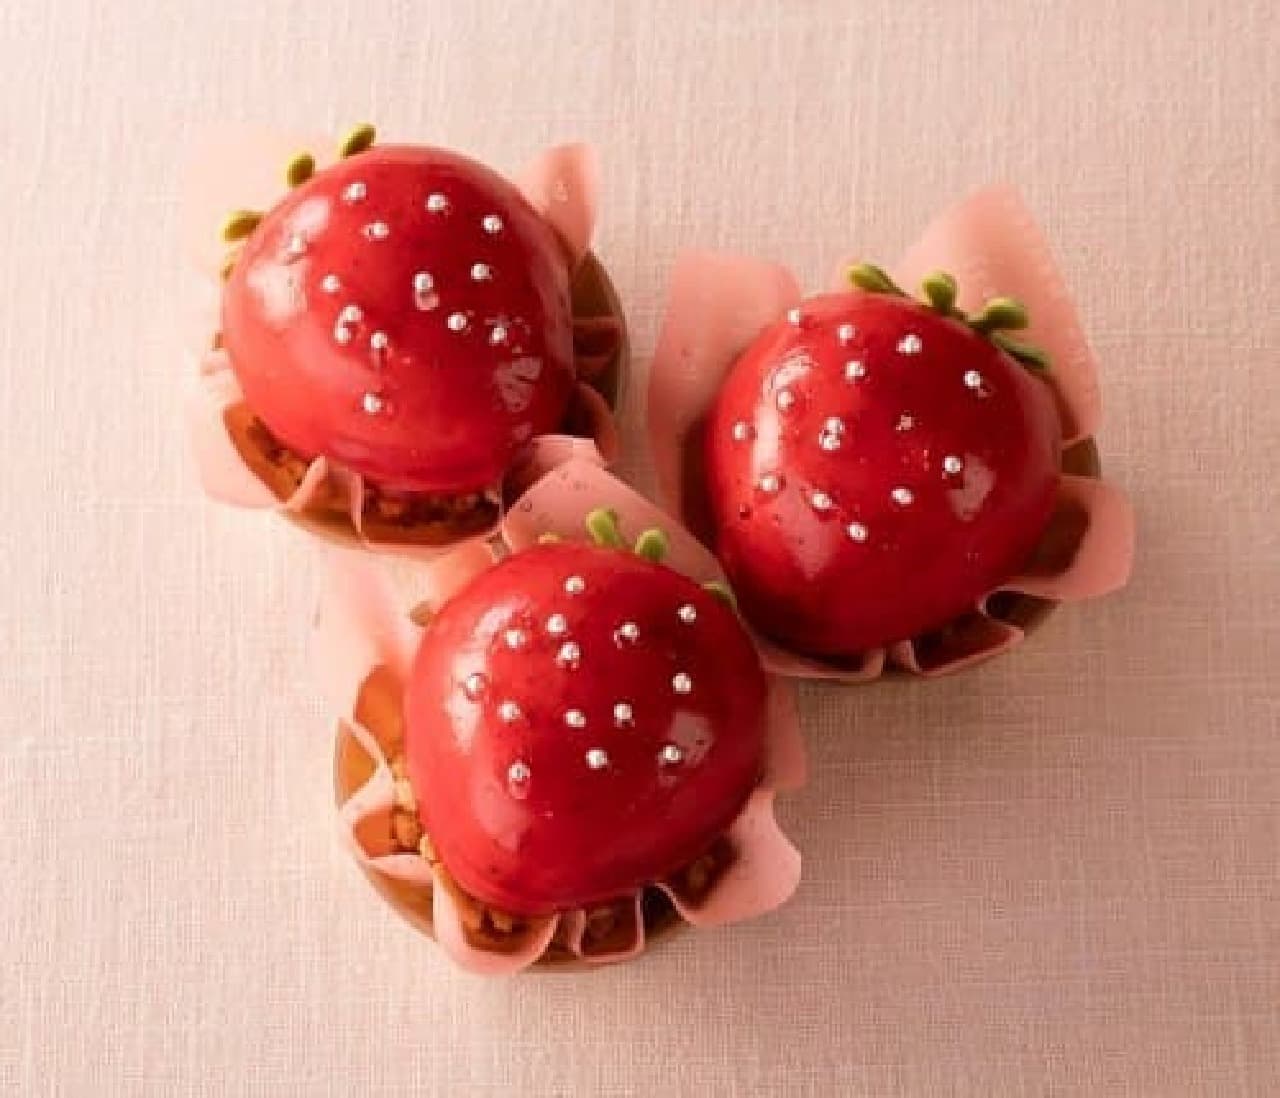 Chateraise "Strawberry Cake"